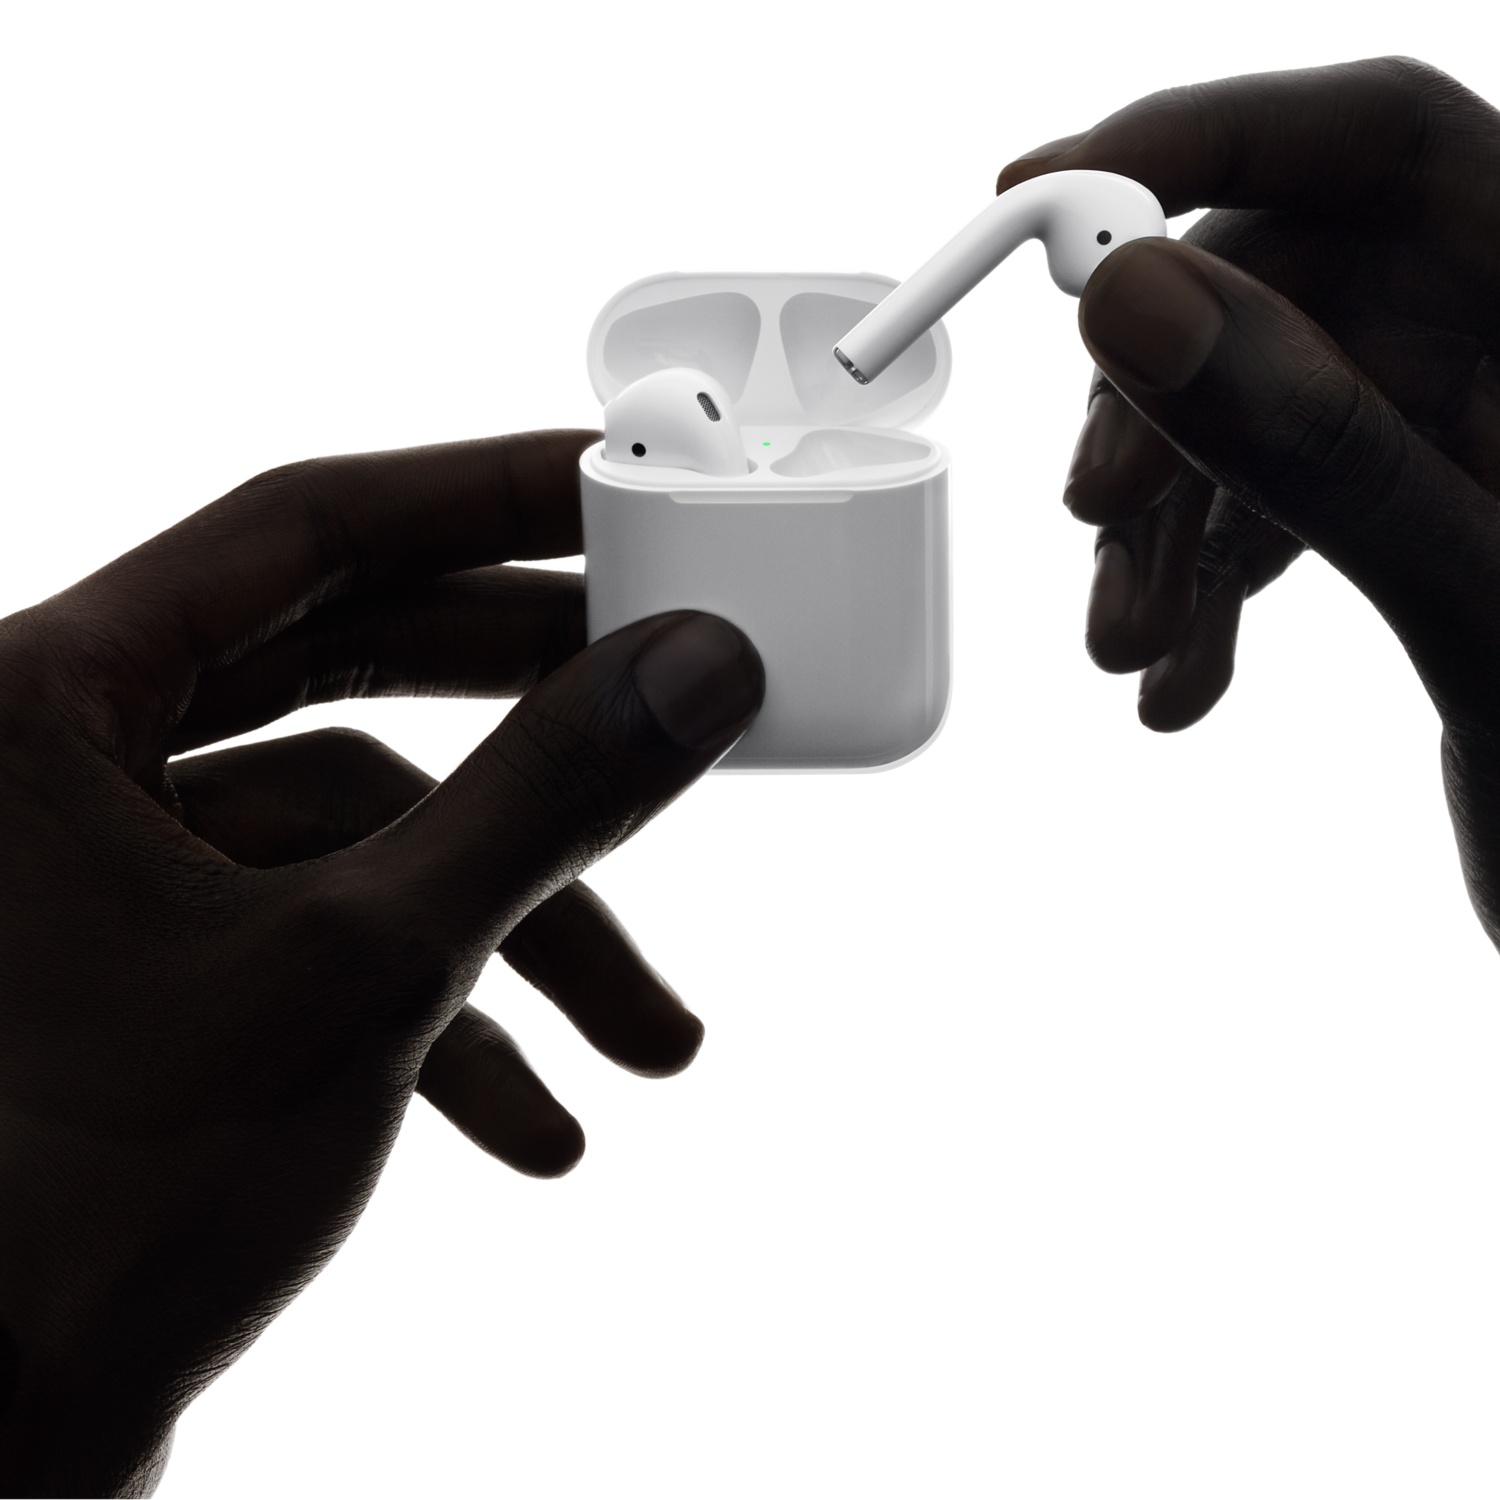 Apple Airpods with hands